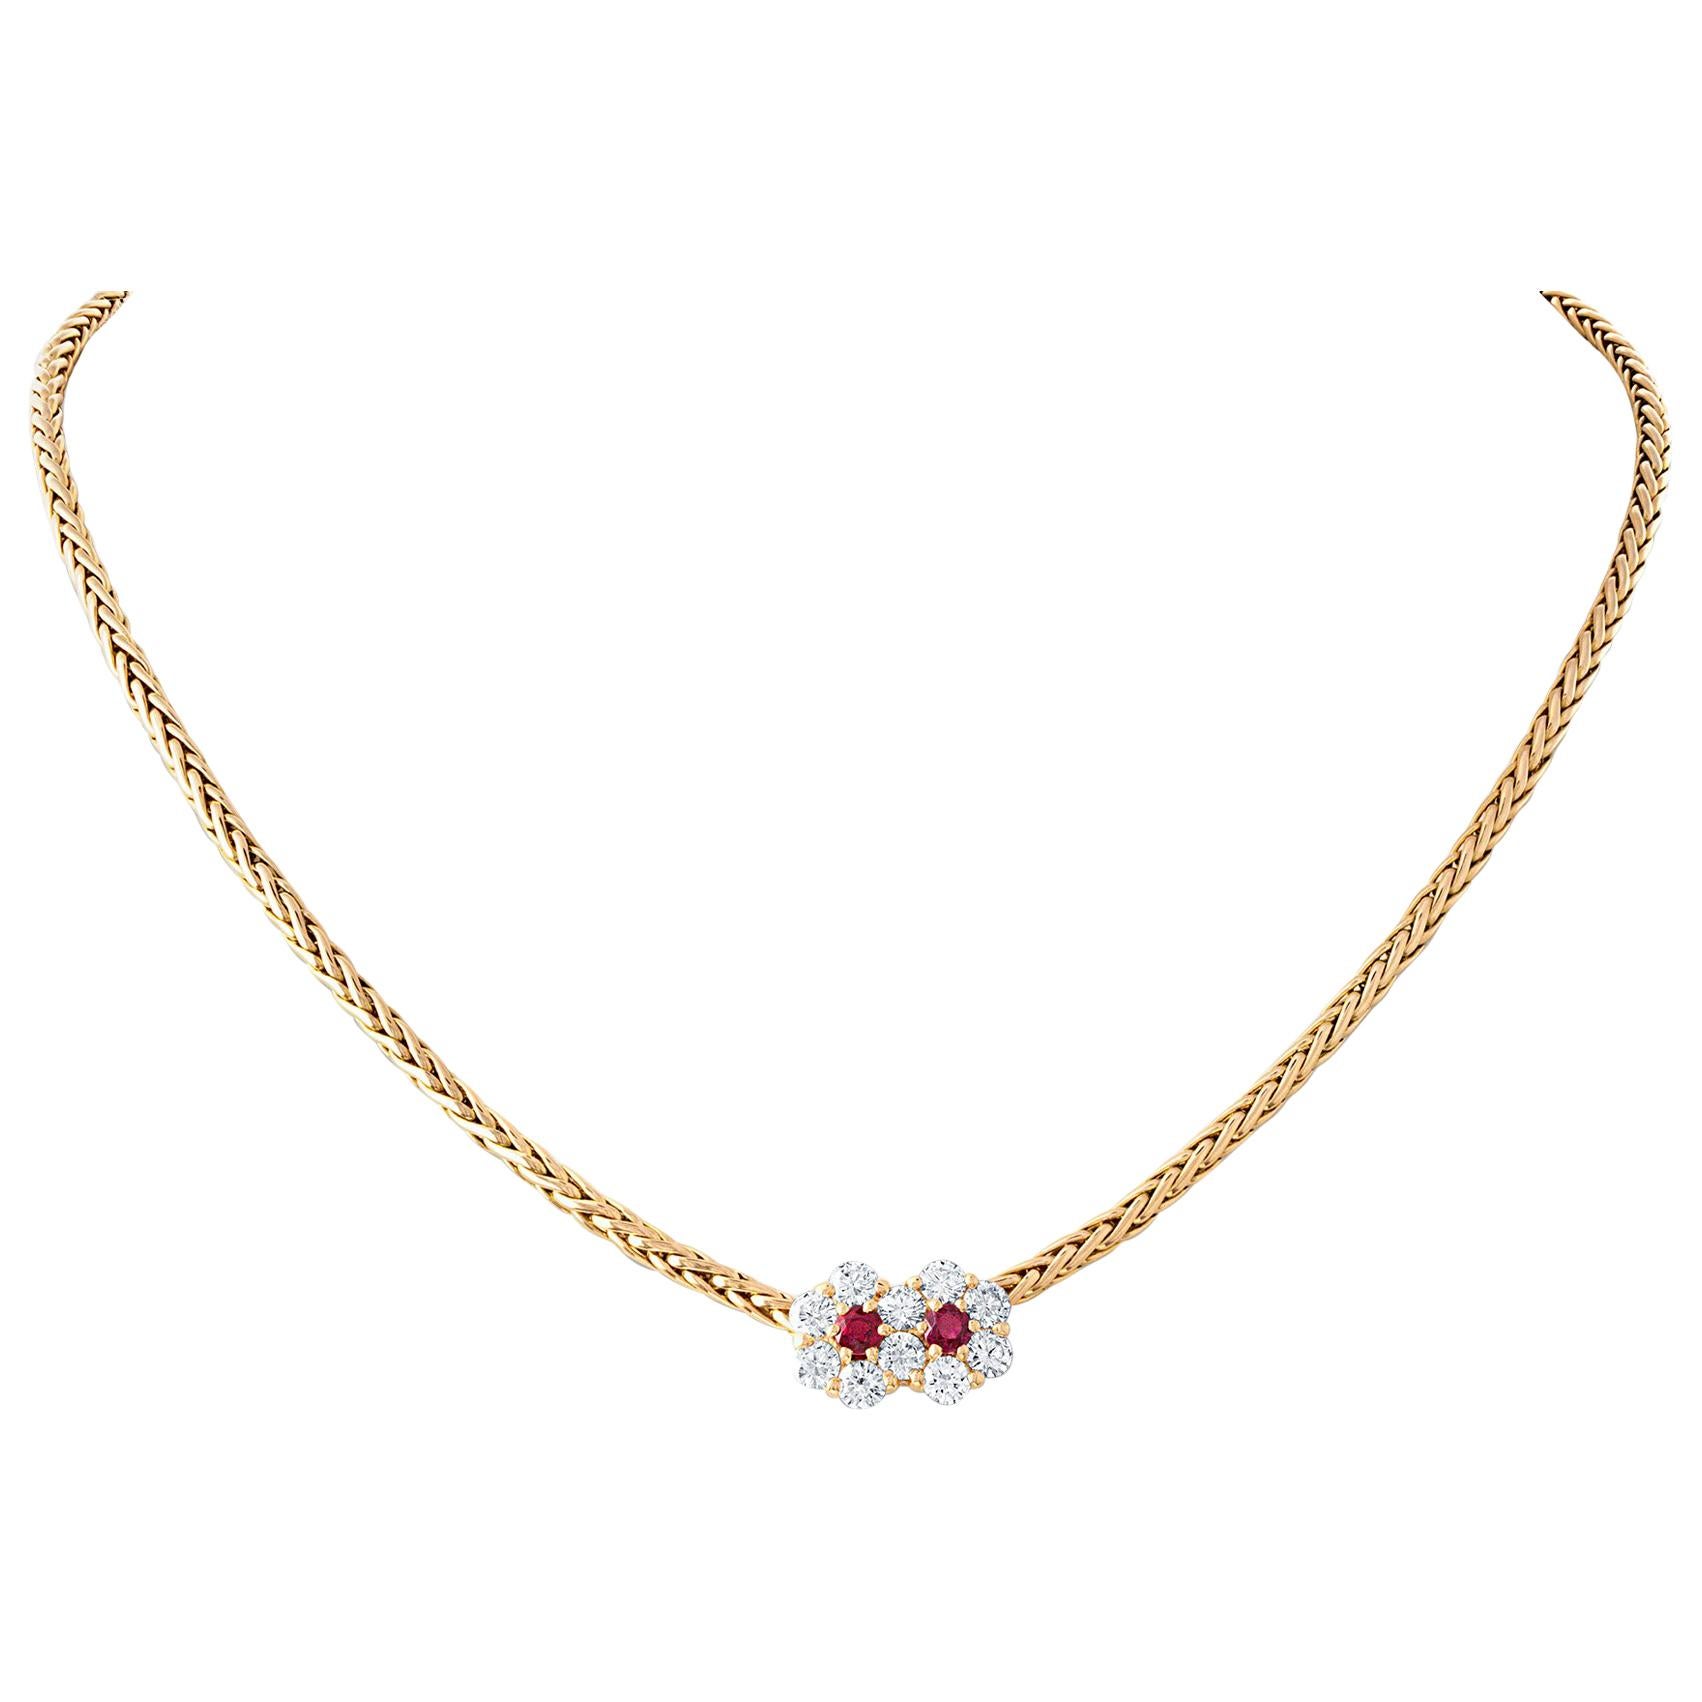 METAL: 18K Yellow Gold
STONE WEIGHT: 1.00ct twd
TOTAL WEIGHT: 21.1g
NECKLACE LENGTH: 16.5